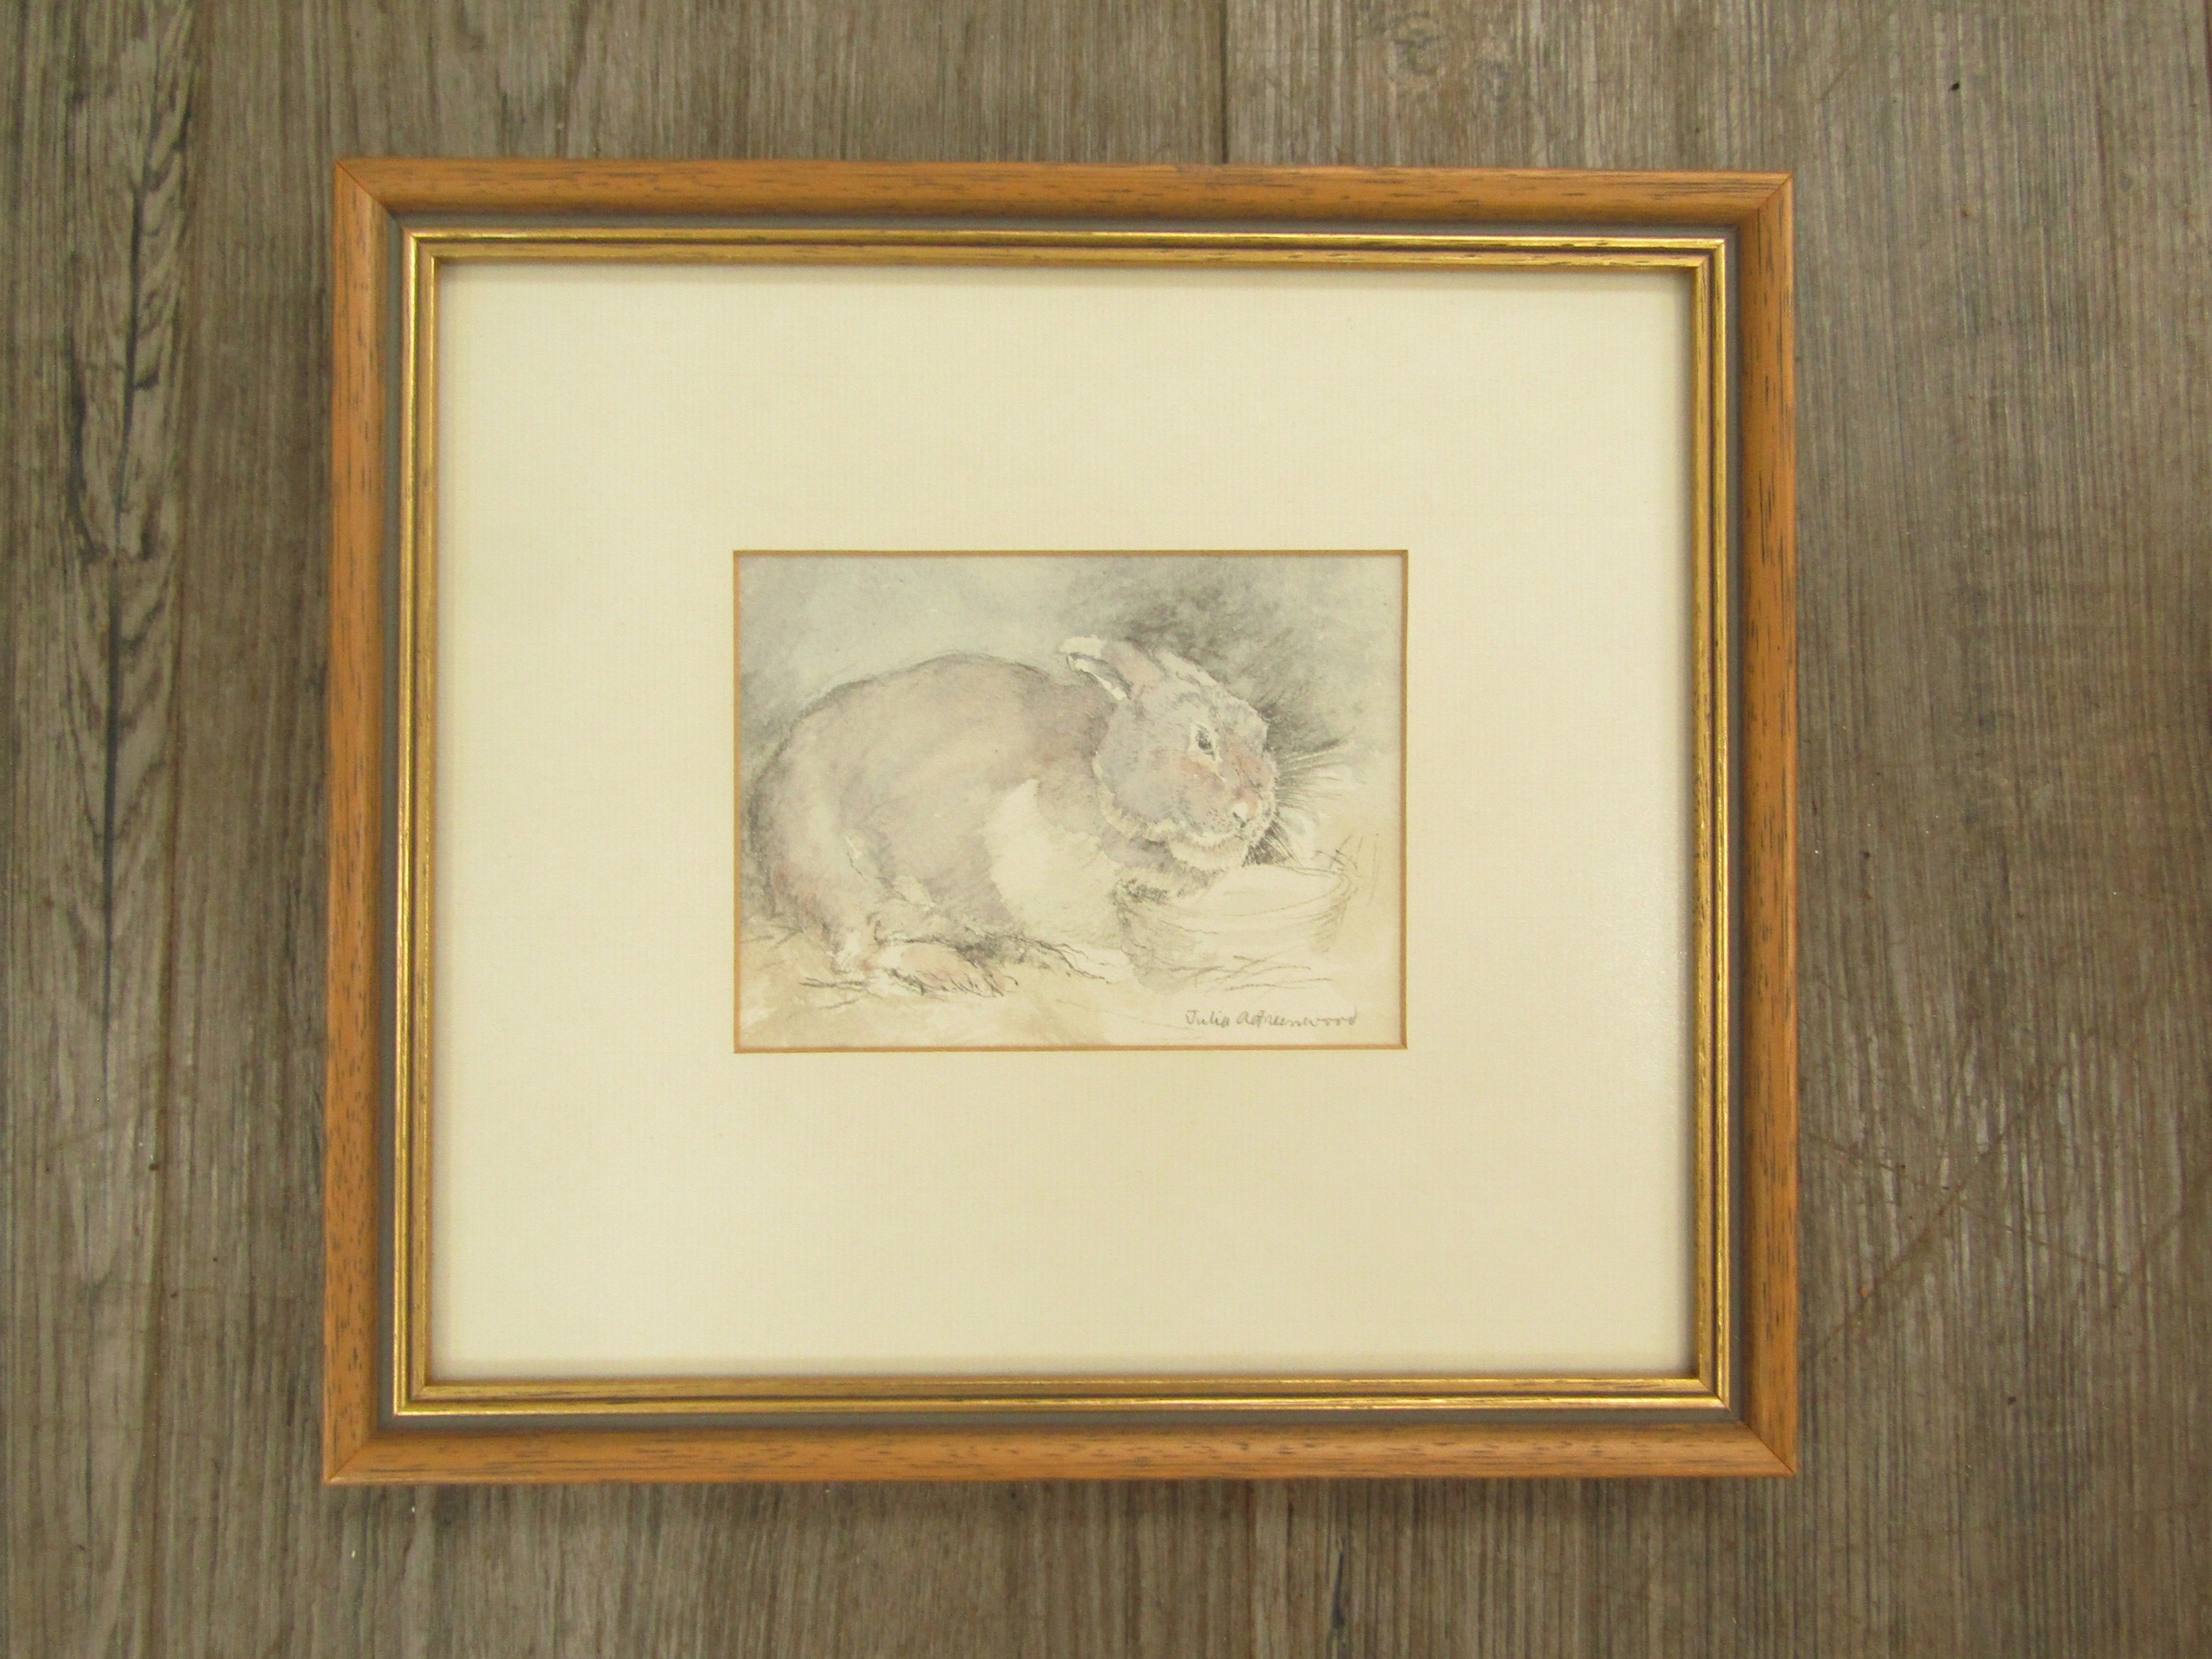 JULIA GREENWOOD (1951-2010) framed and glazed water colour on paper of a rabbit. Artist has exibited